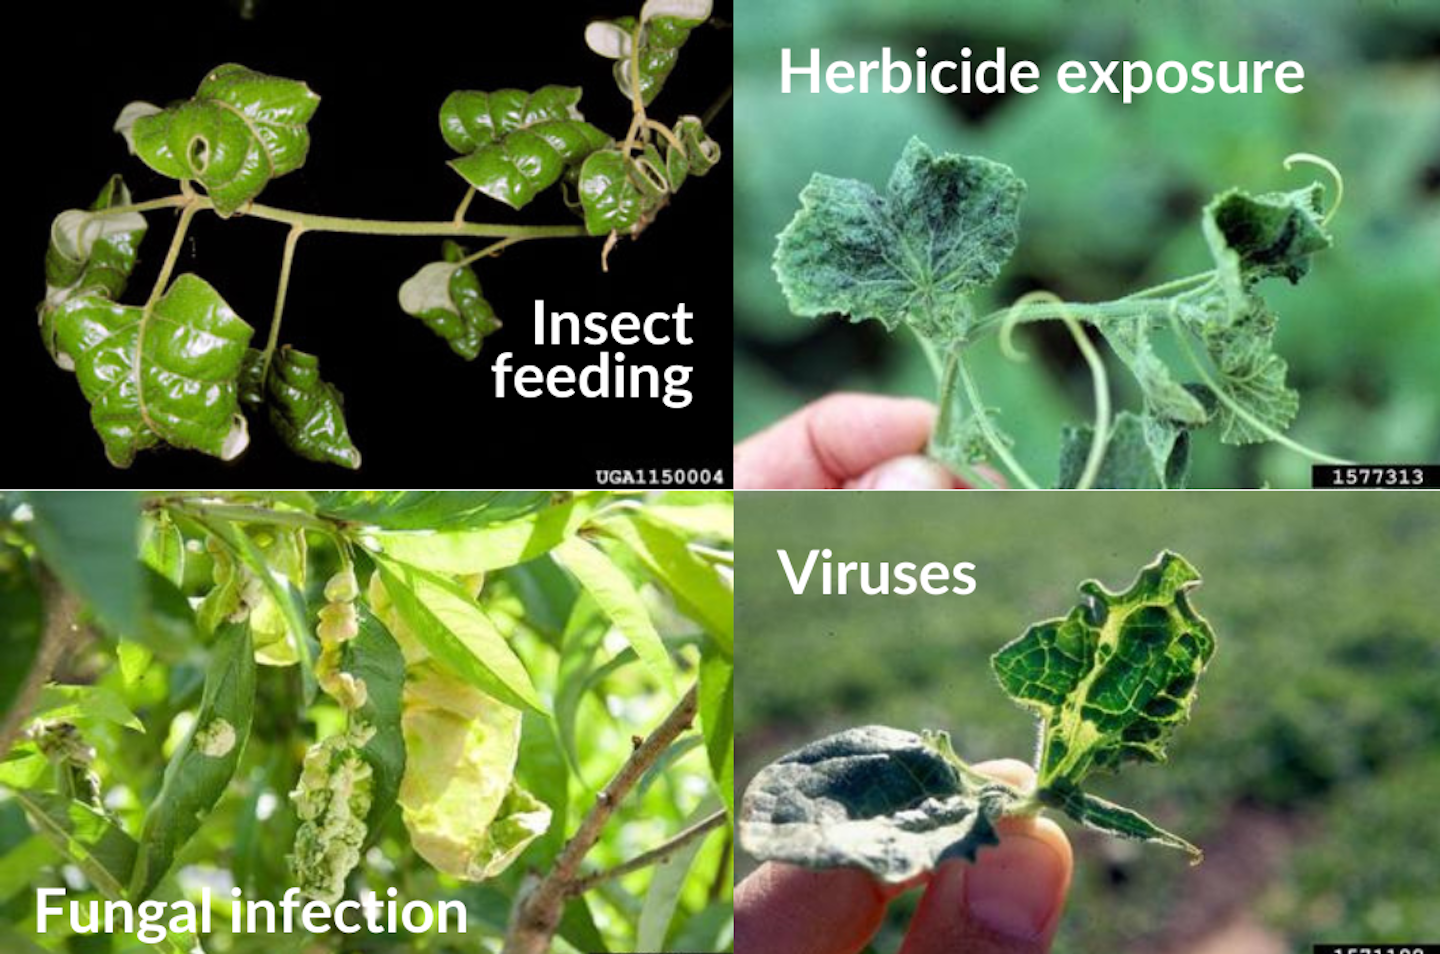 Photos of four different plants with curled leaves labeled herbicide exposure, virus, insect feeding and fungal infection.